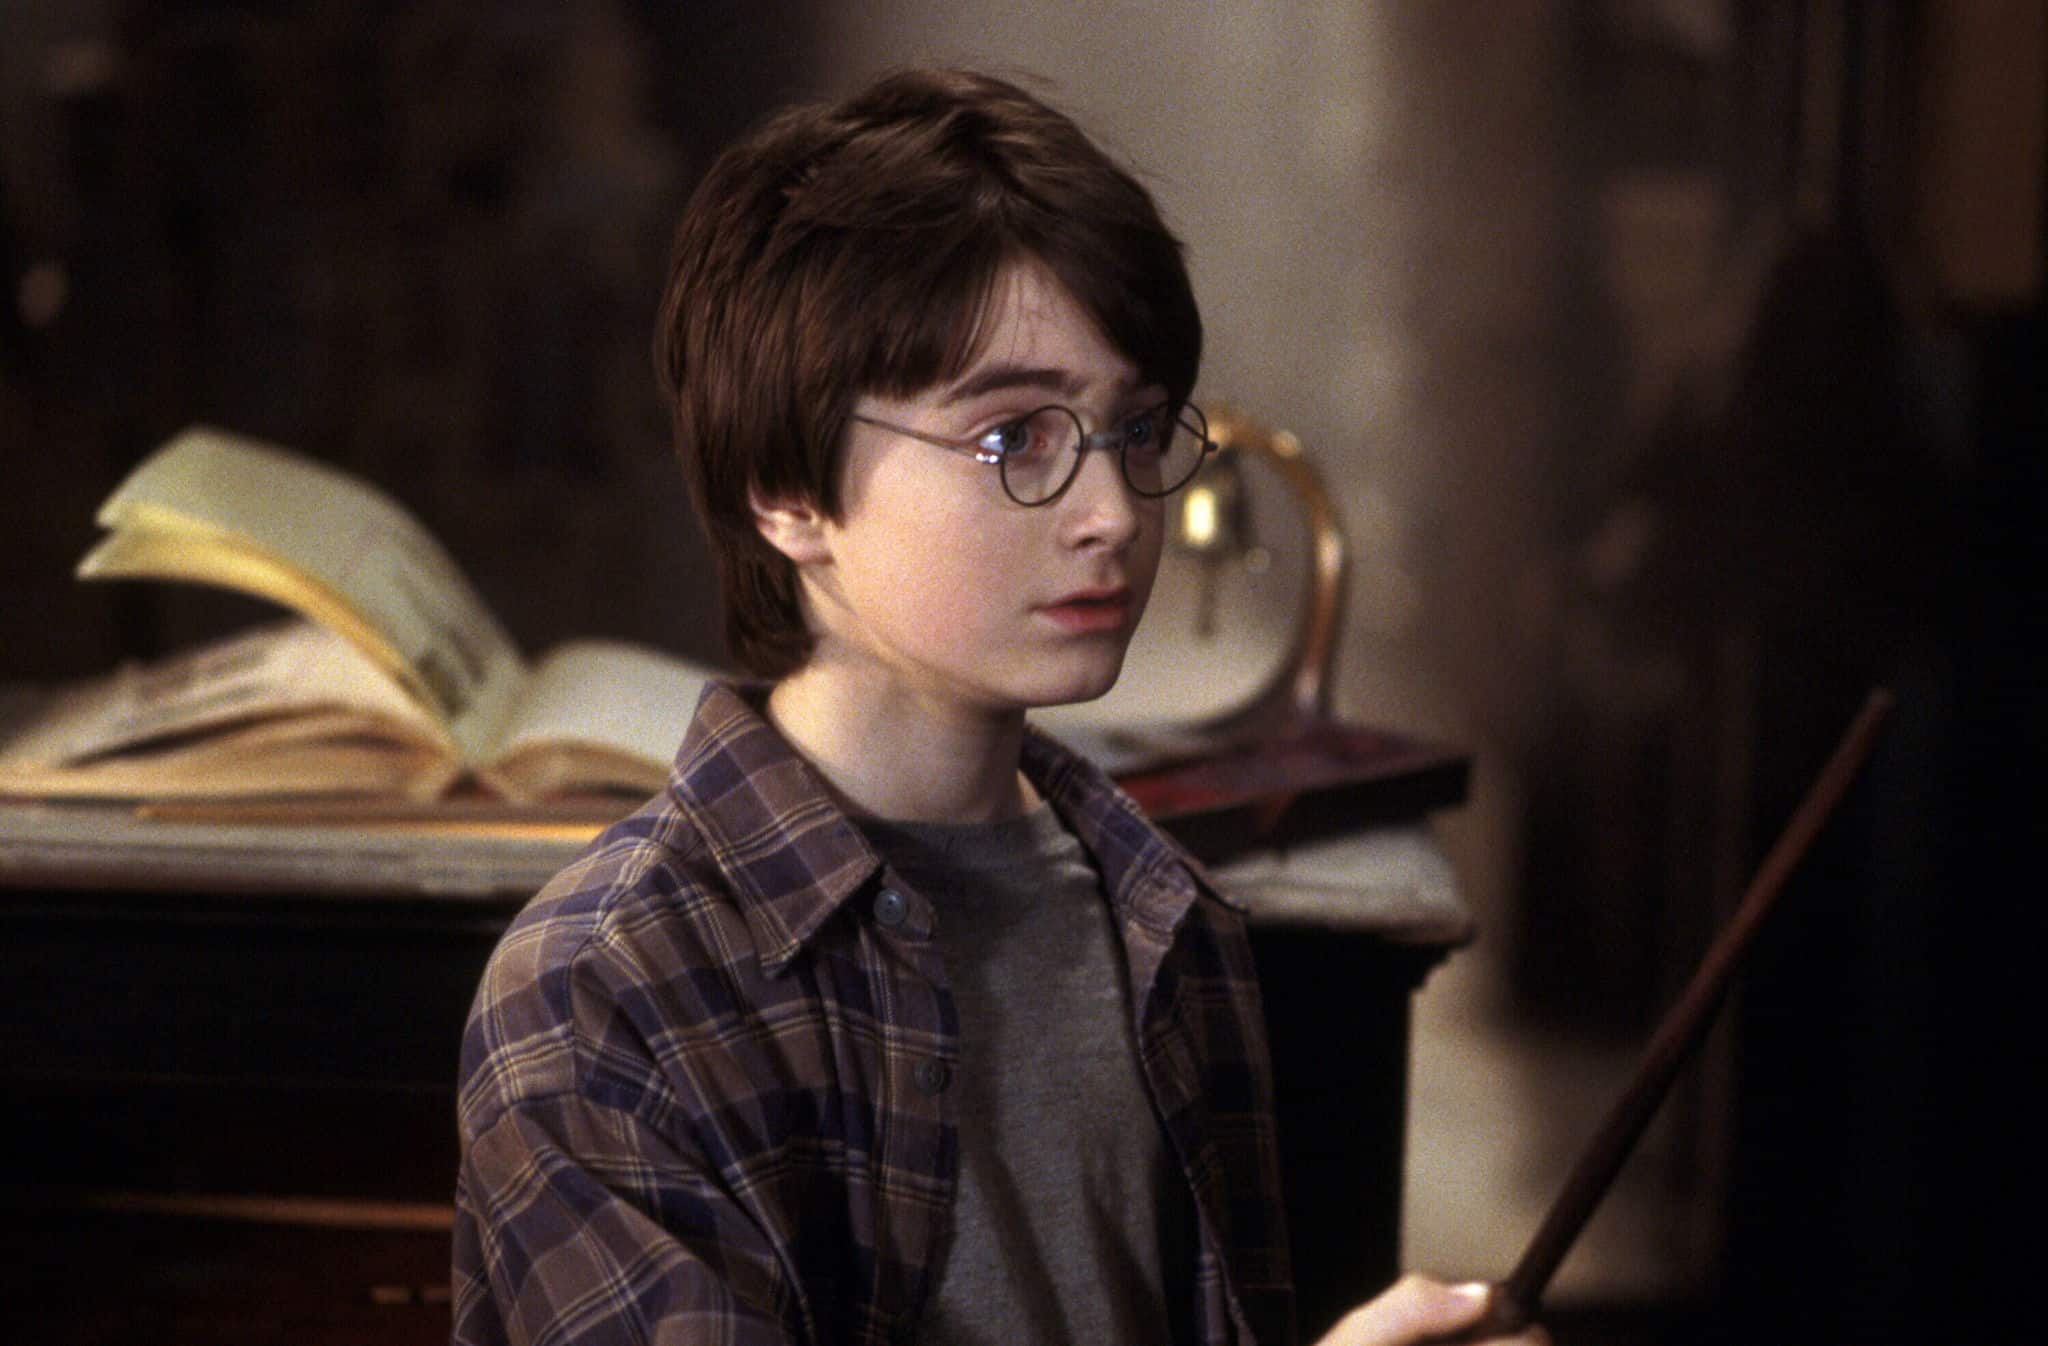 Daniel Radcliffe in this image from Warner Bros. Pictures